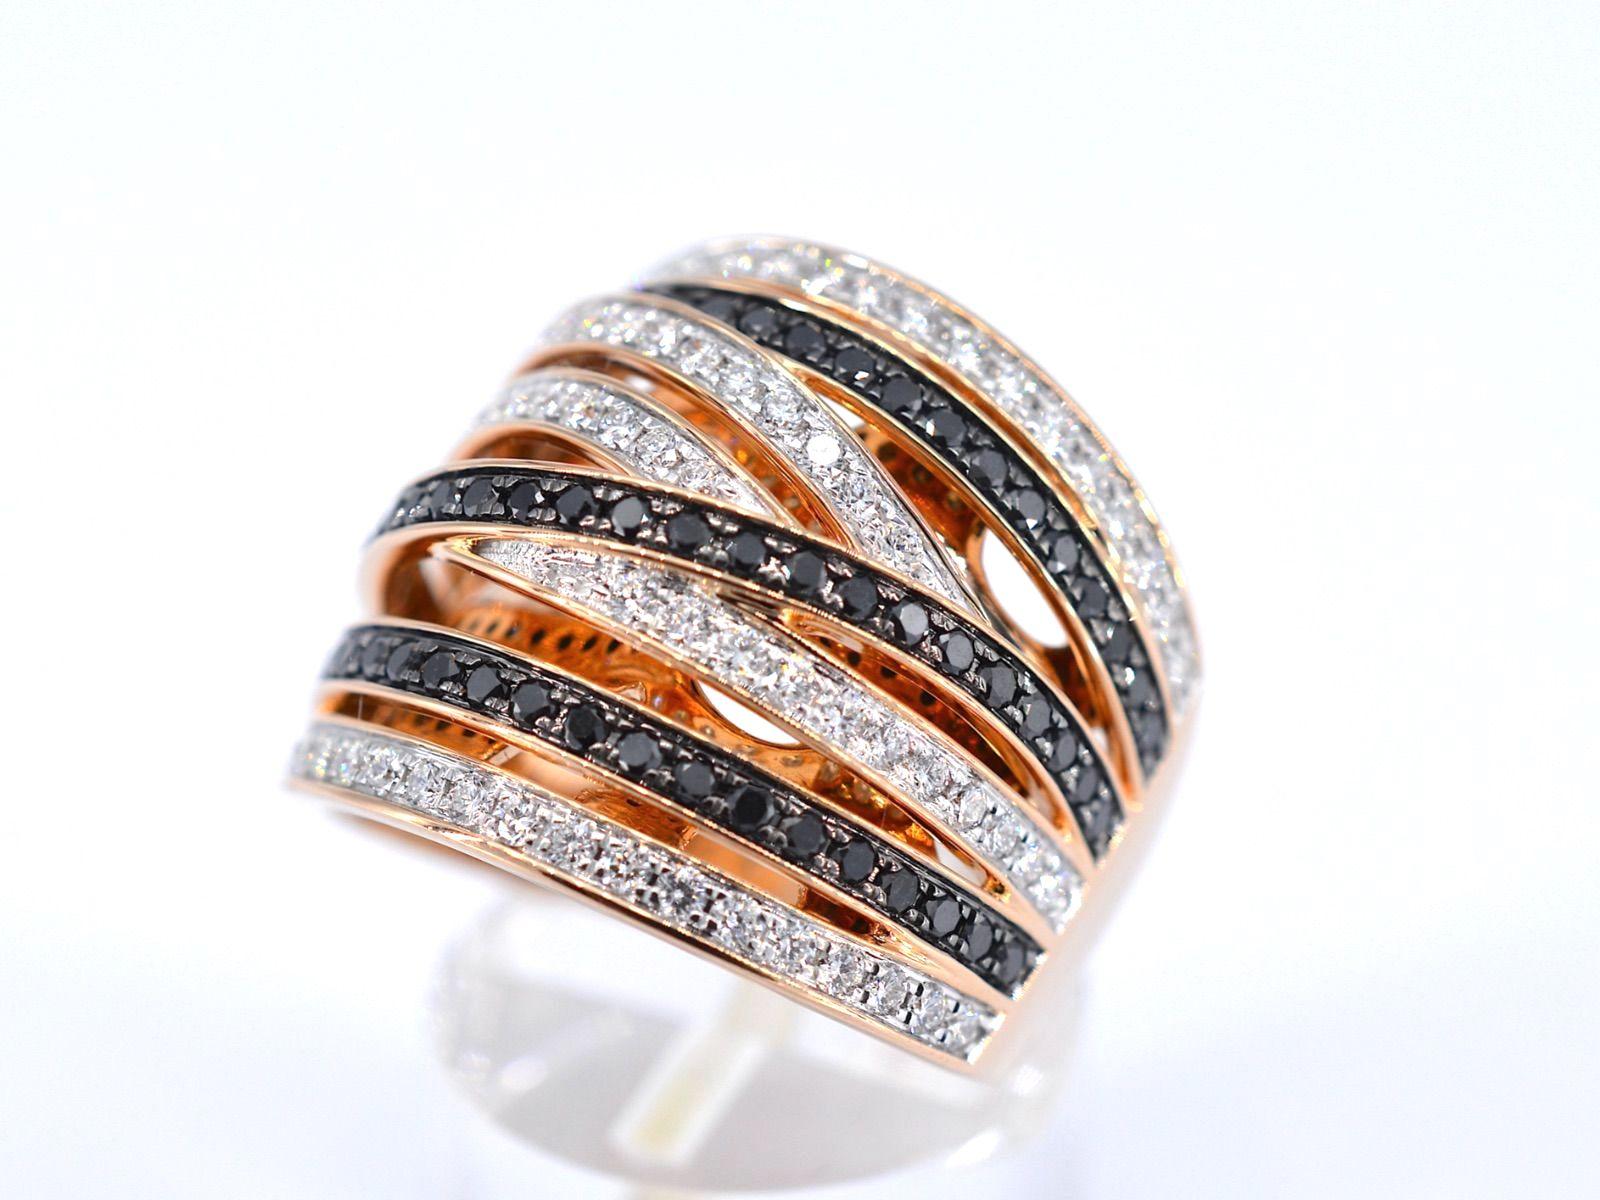 Diamonds: Naturally Shiny
Weight: 1.50 carat
Shape: Brilliant cut
Colour: high white (F-G) and black (enhanced)
Clarity: US
Quality: Very nice

Jewel: Ring
Weight: 11 gram
Hallmark: 18 karat 
Ring size: 54 (17.25 mm)
Condition: New

Retail value: €